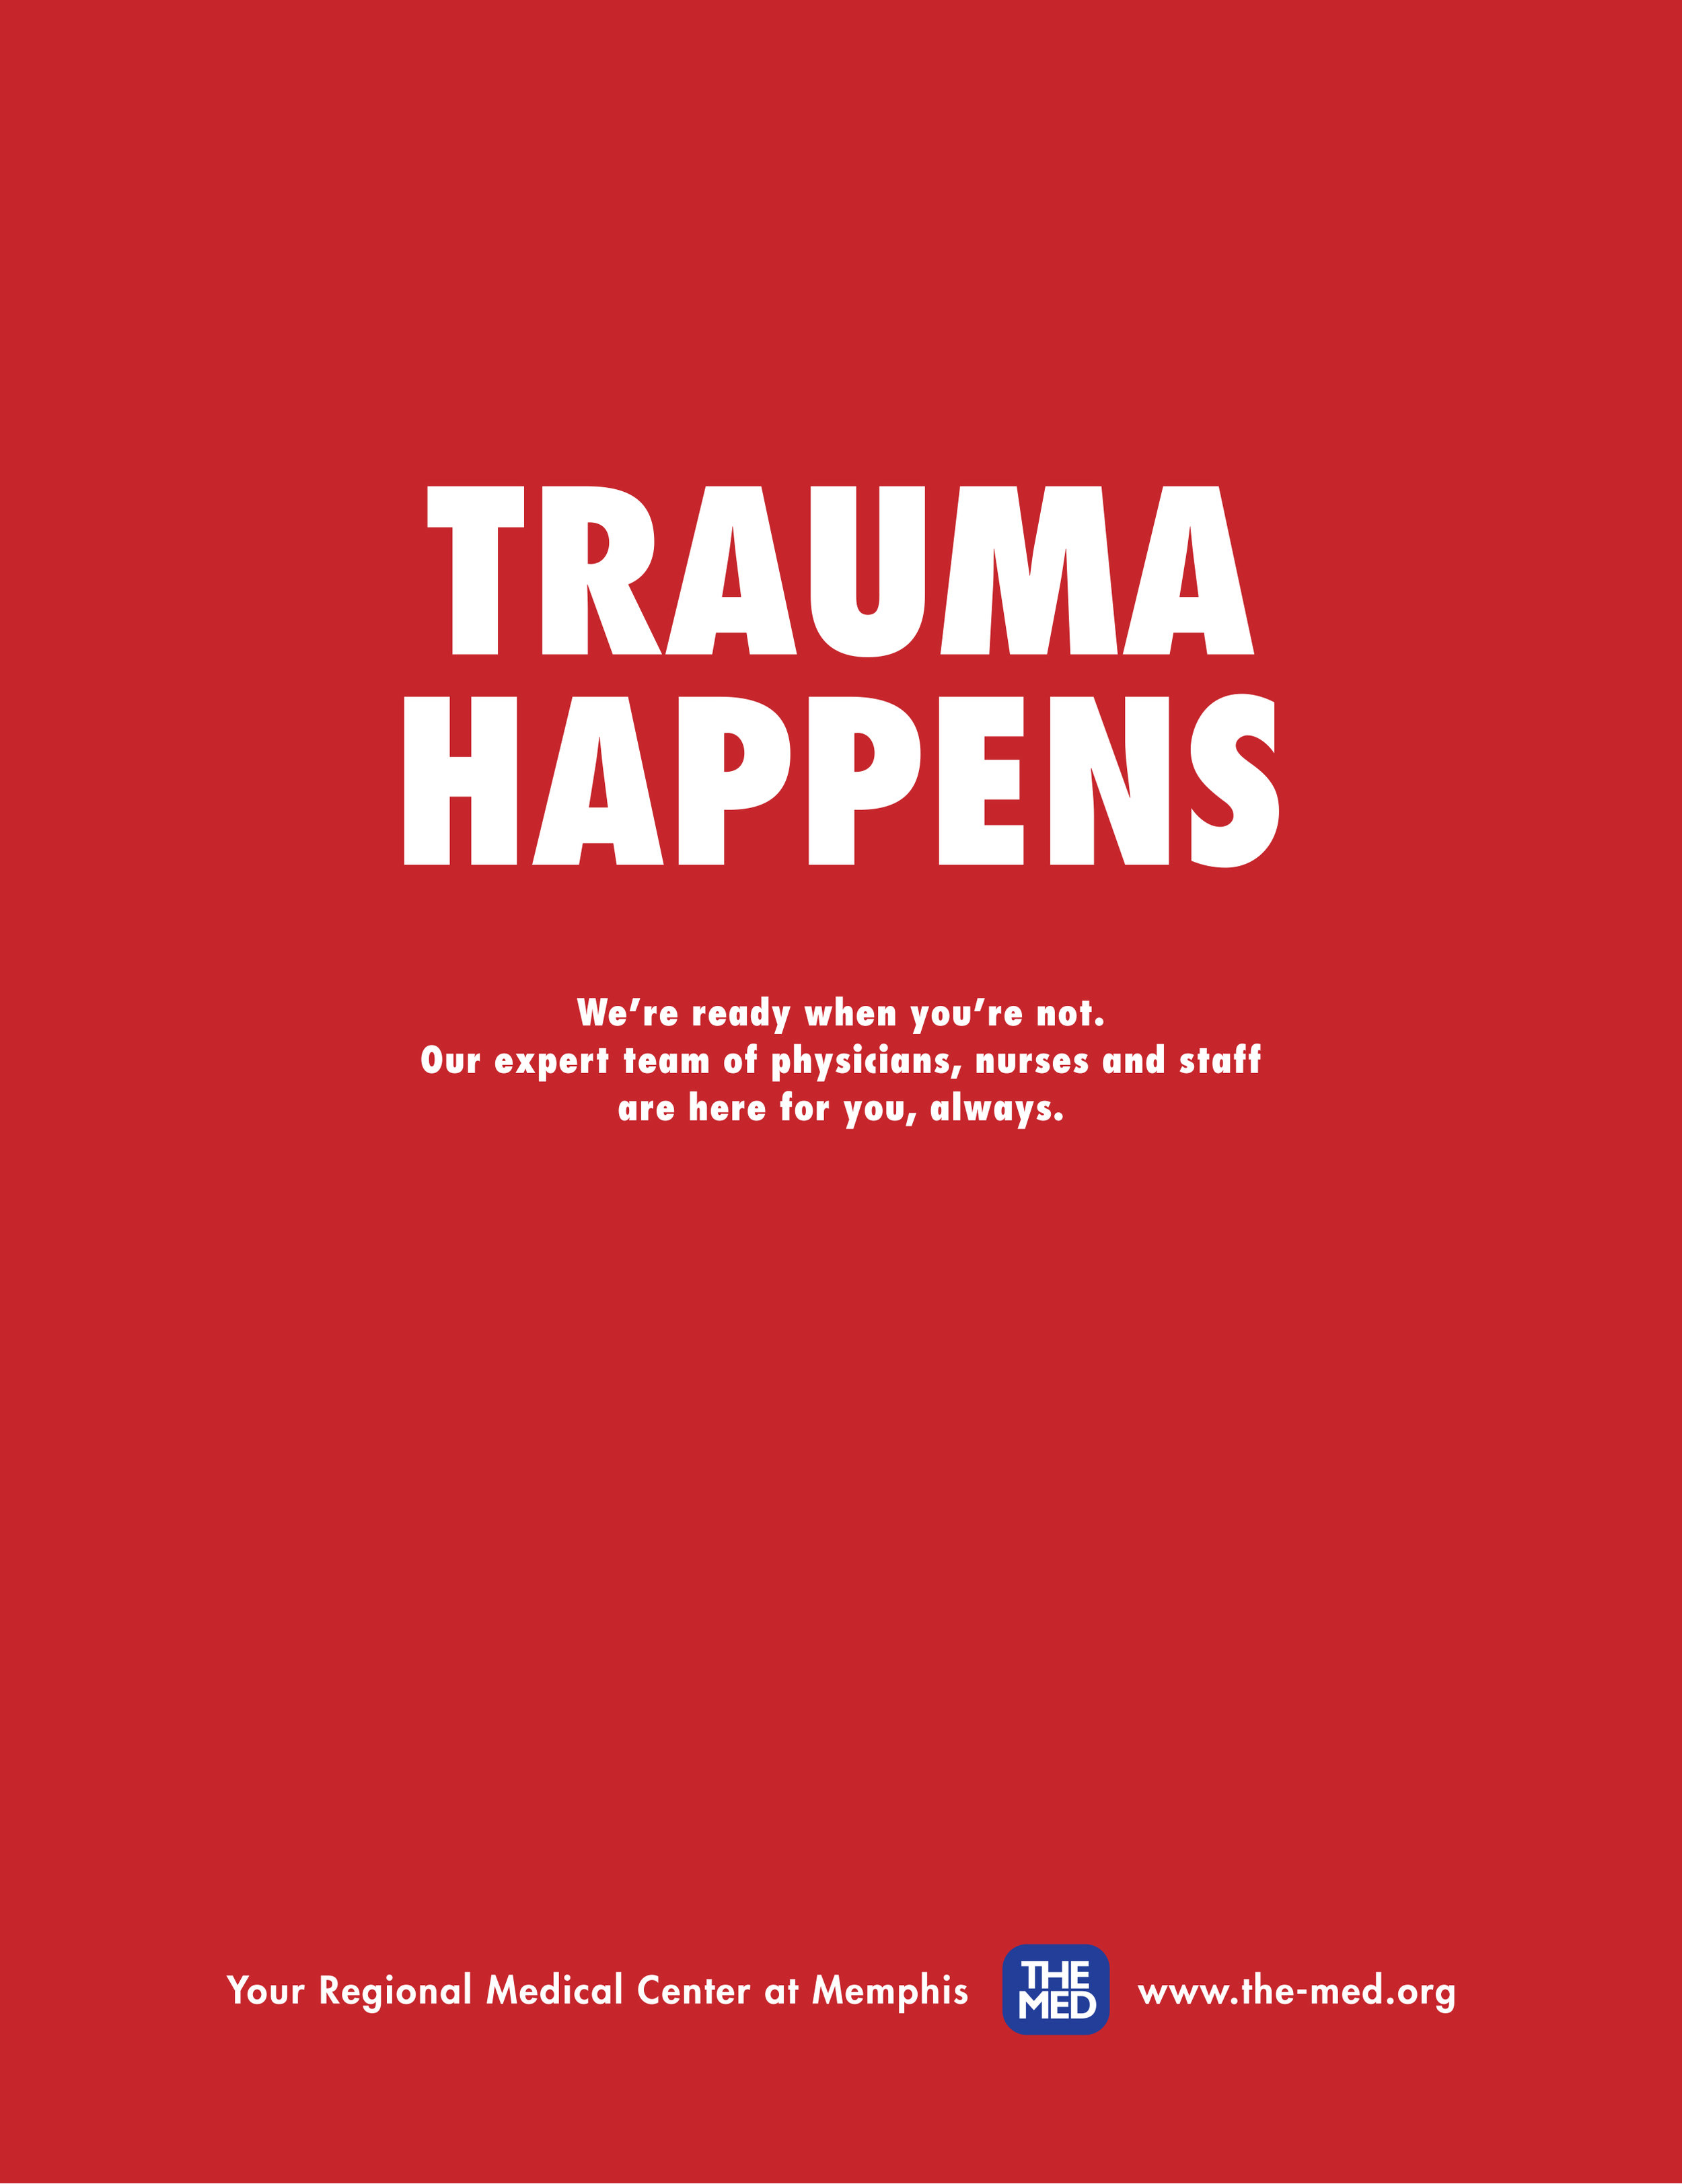  The MED, Regional Medical Center at Memphis “TRAUMA HAPPENS” full-page ad for Grizzlies publication  Branding creative, design and copywriting by Chuck Mitchell  The MED logo by the late Bill Womack 